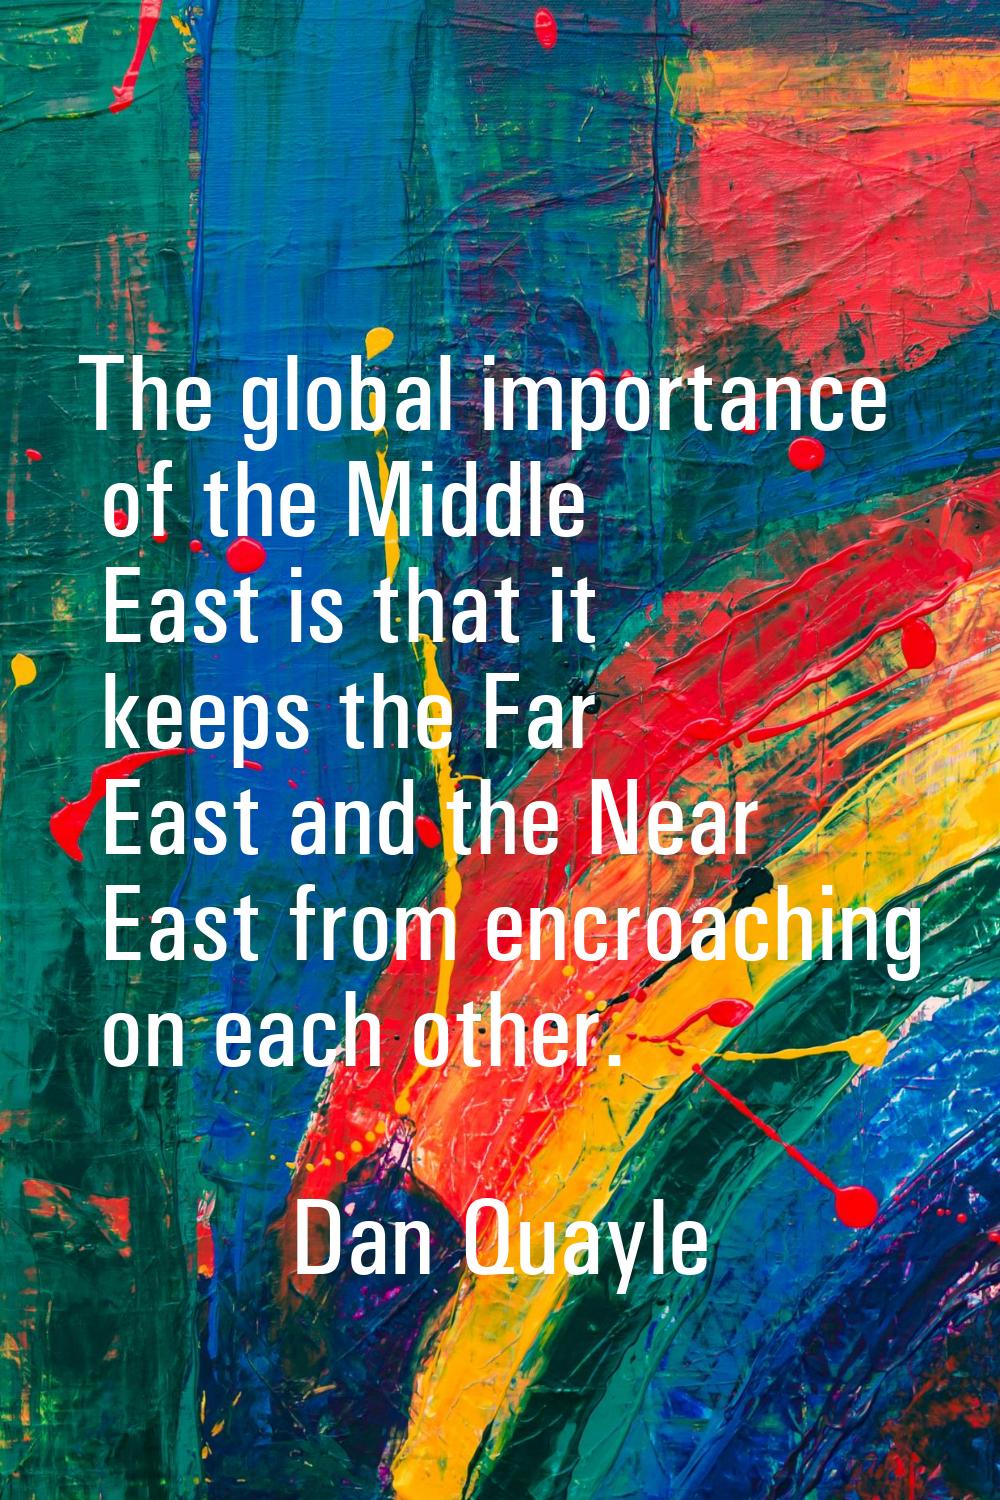 The global importance of the Middle East is that it keeps the Far East and the Near East from encro